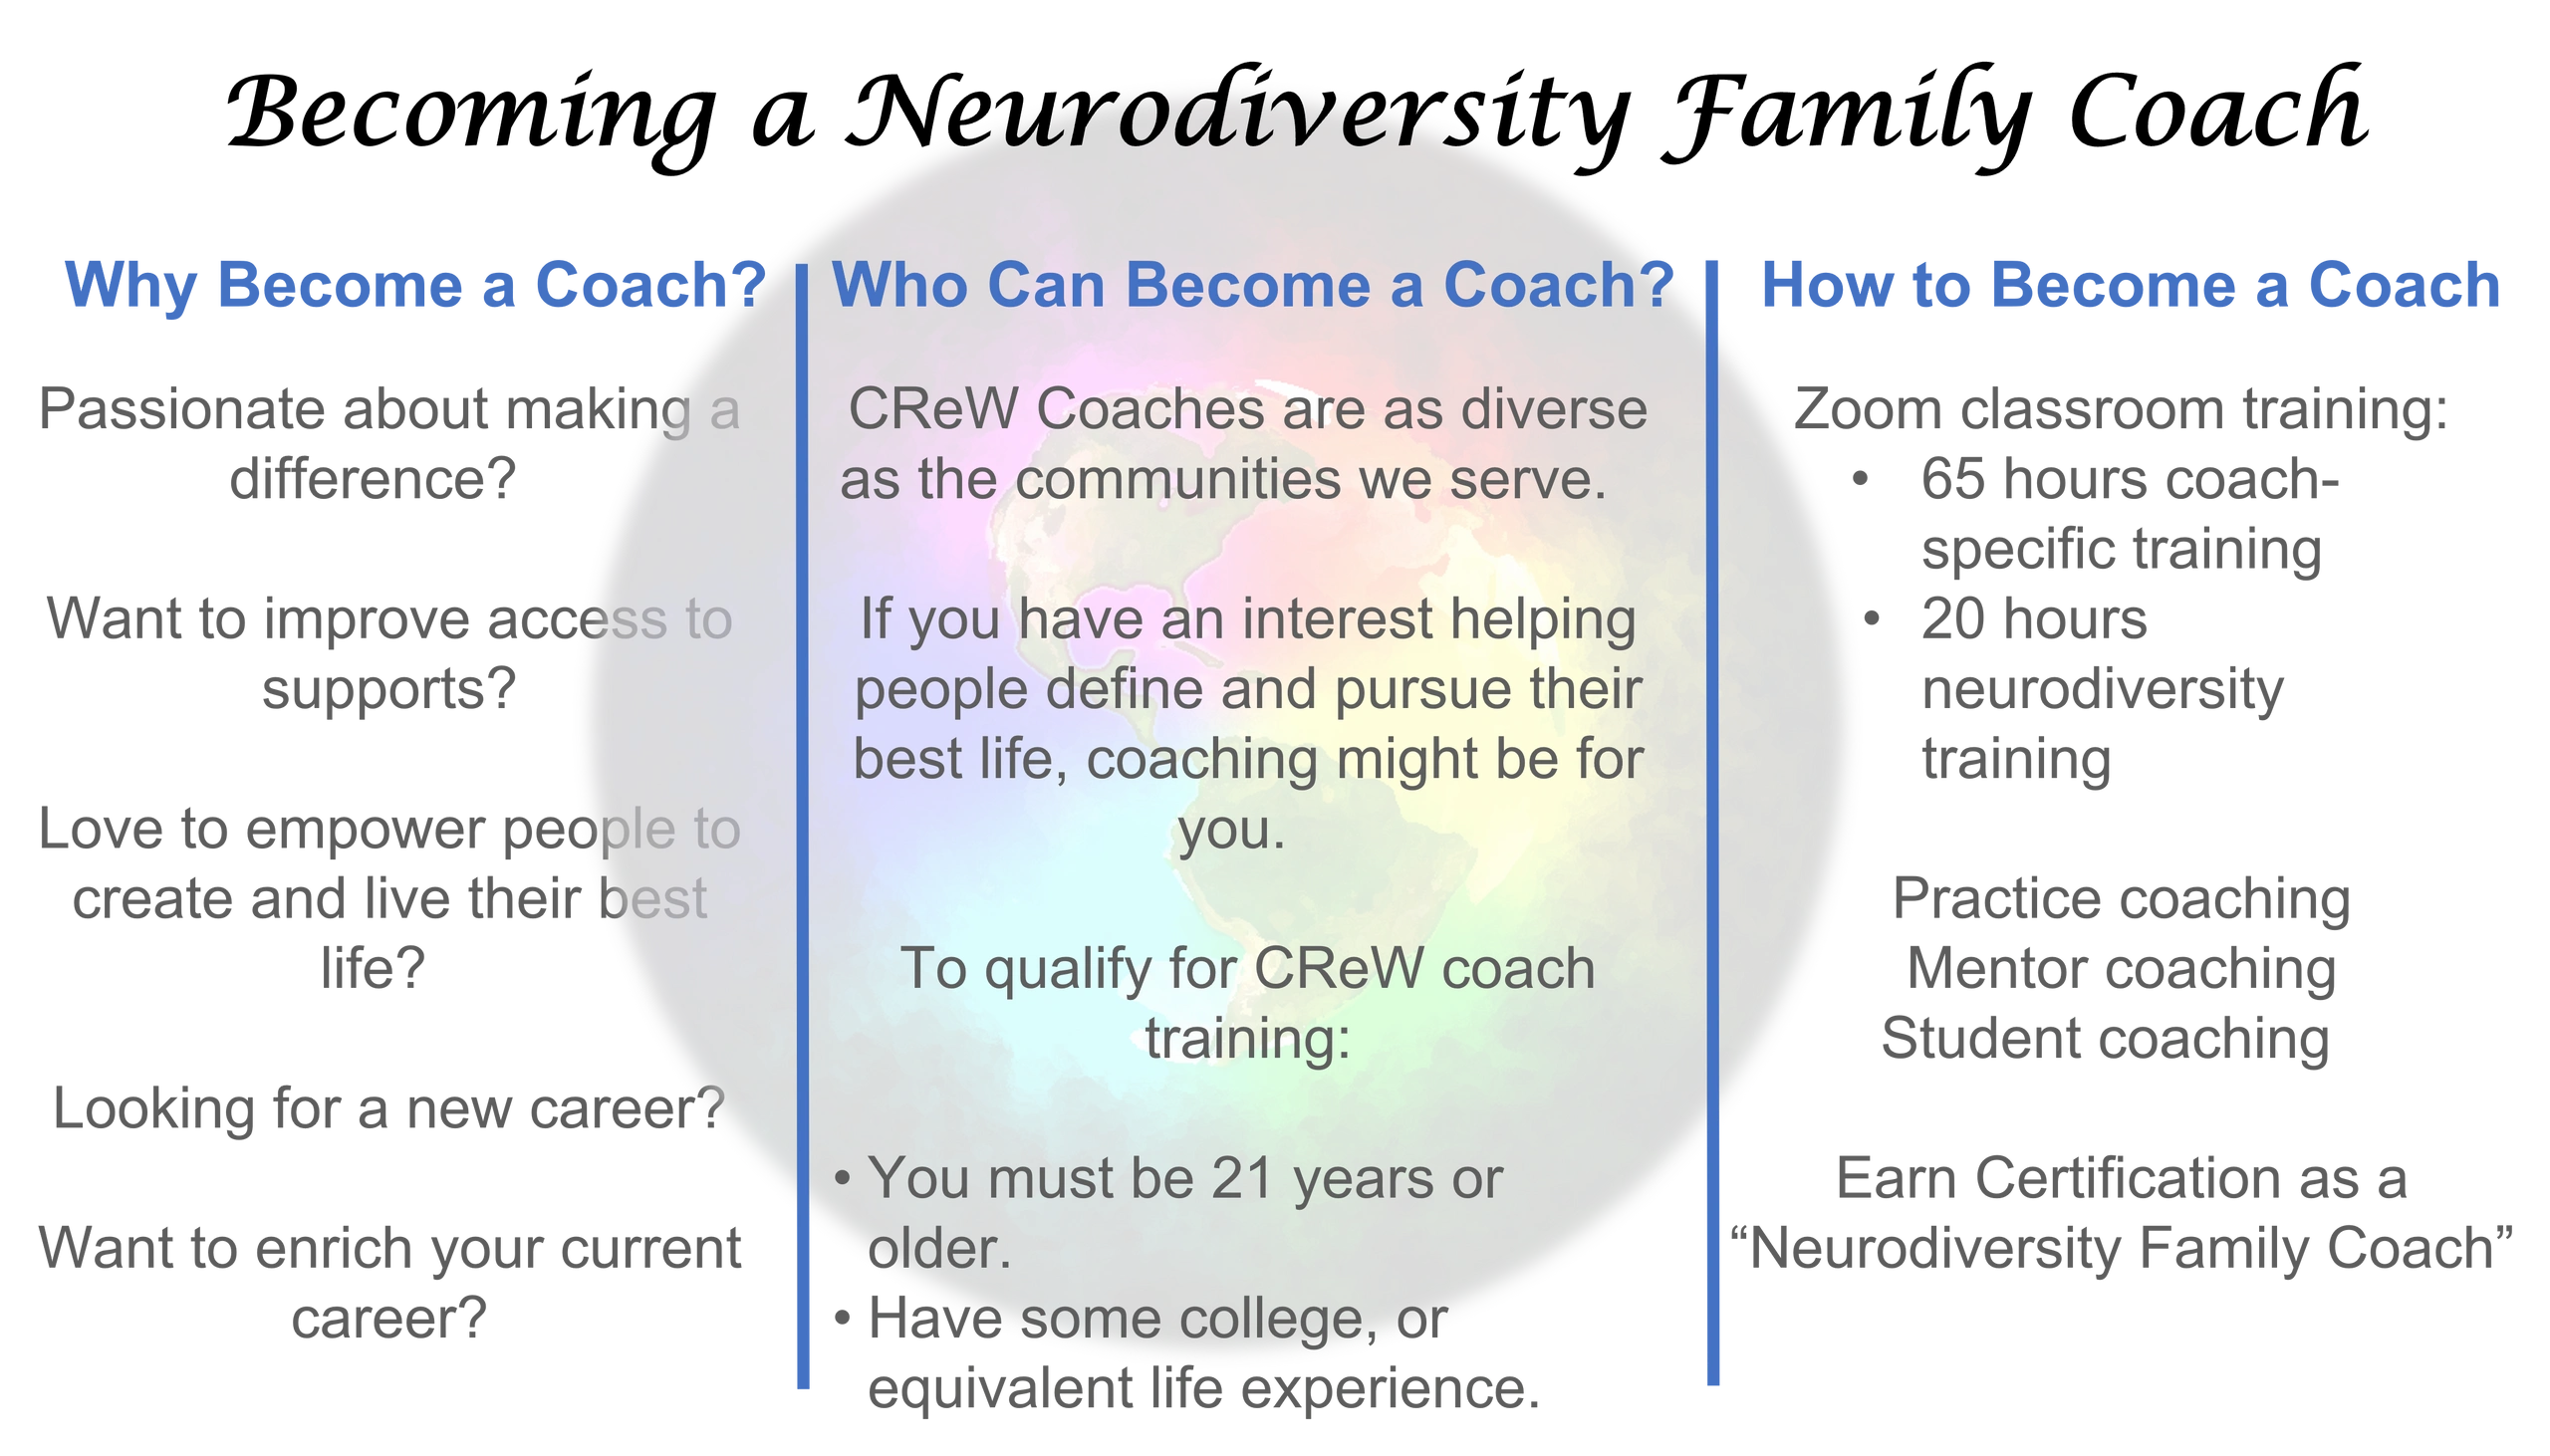 why become a coach, how to become a coach, who can become a coach, neurodiversity